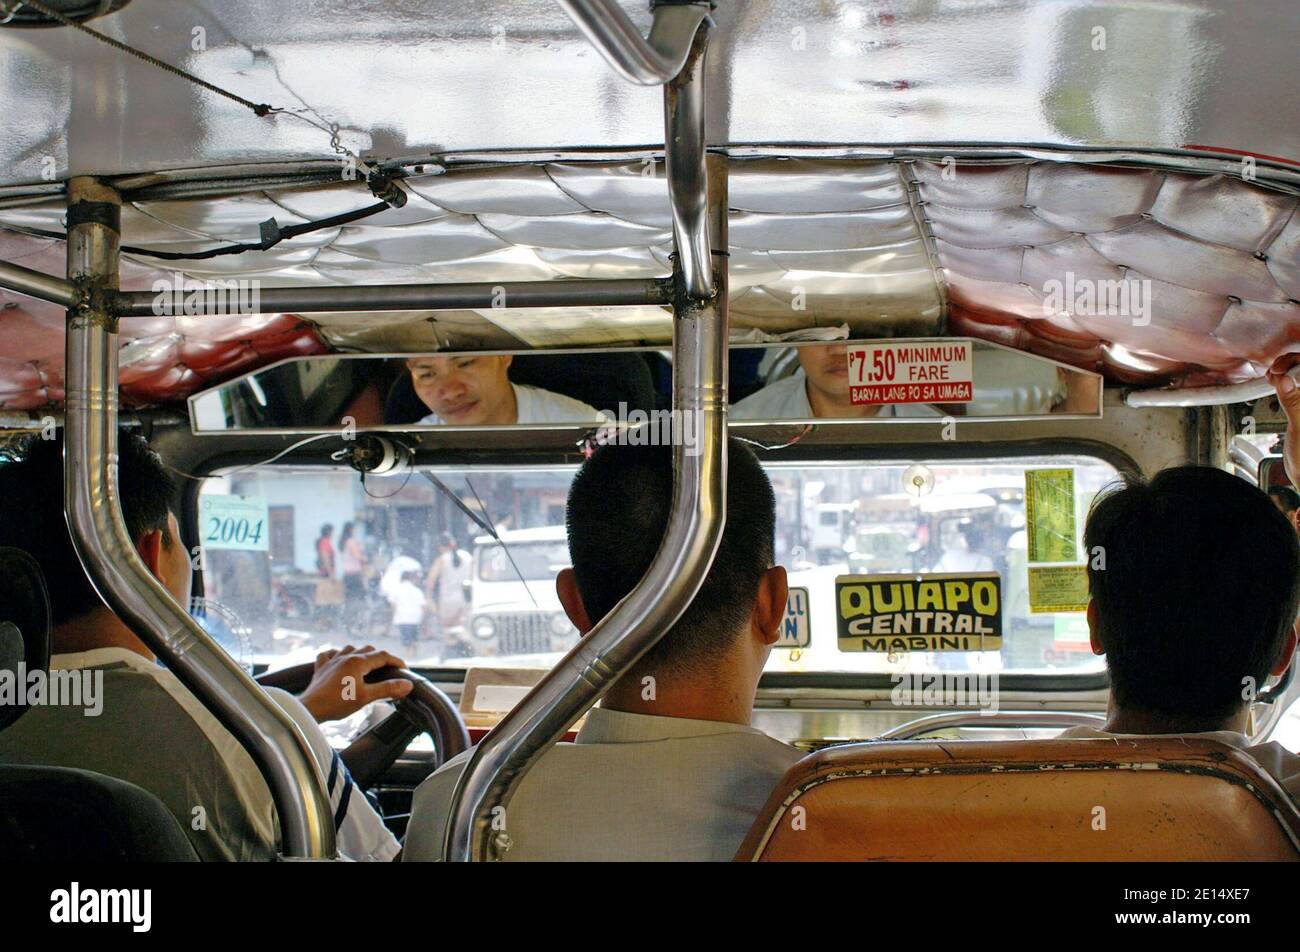 A jeepney driver and two front seat passengers makes their way along the Quiapo Central Mabini route in Manila, Philippines.  The interior shot is taken from the main passenger cabin of this Filipino cultural icon. Stock Photo